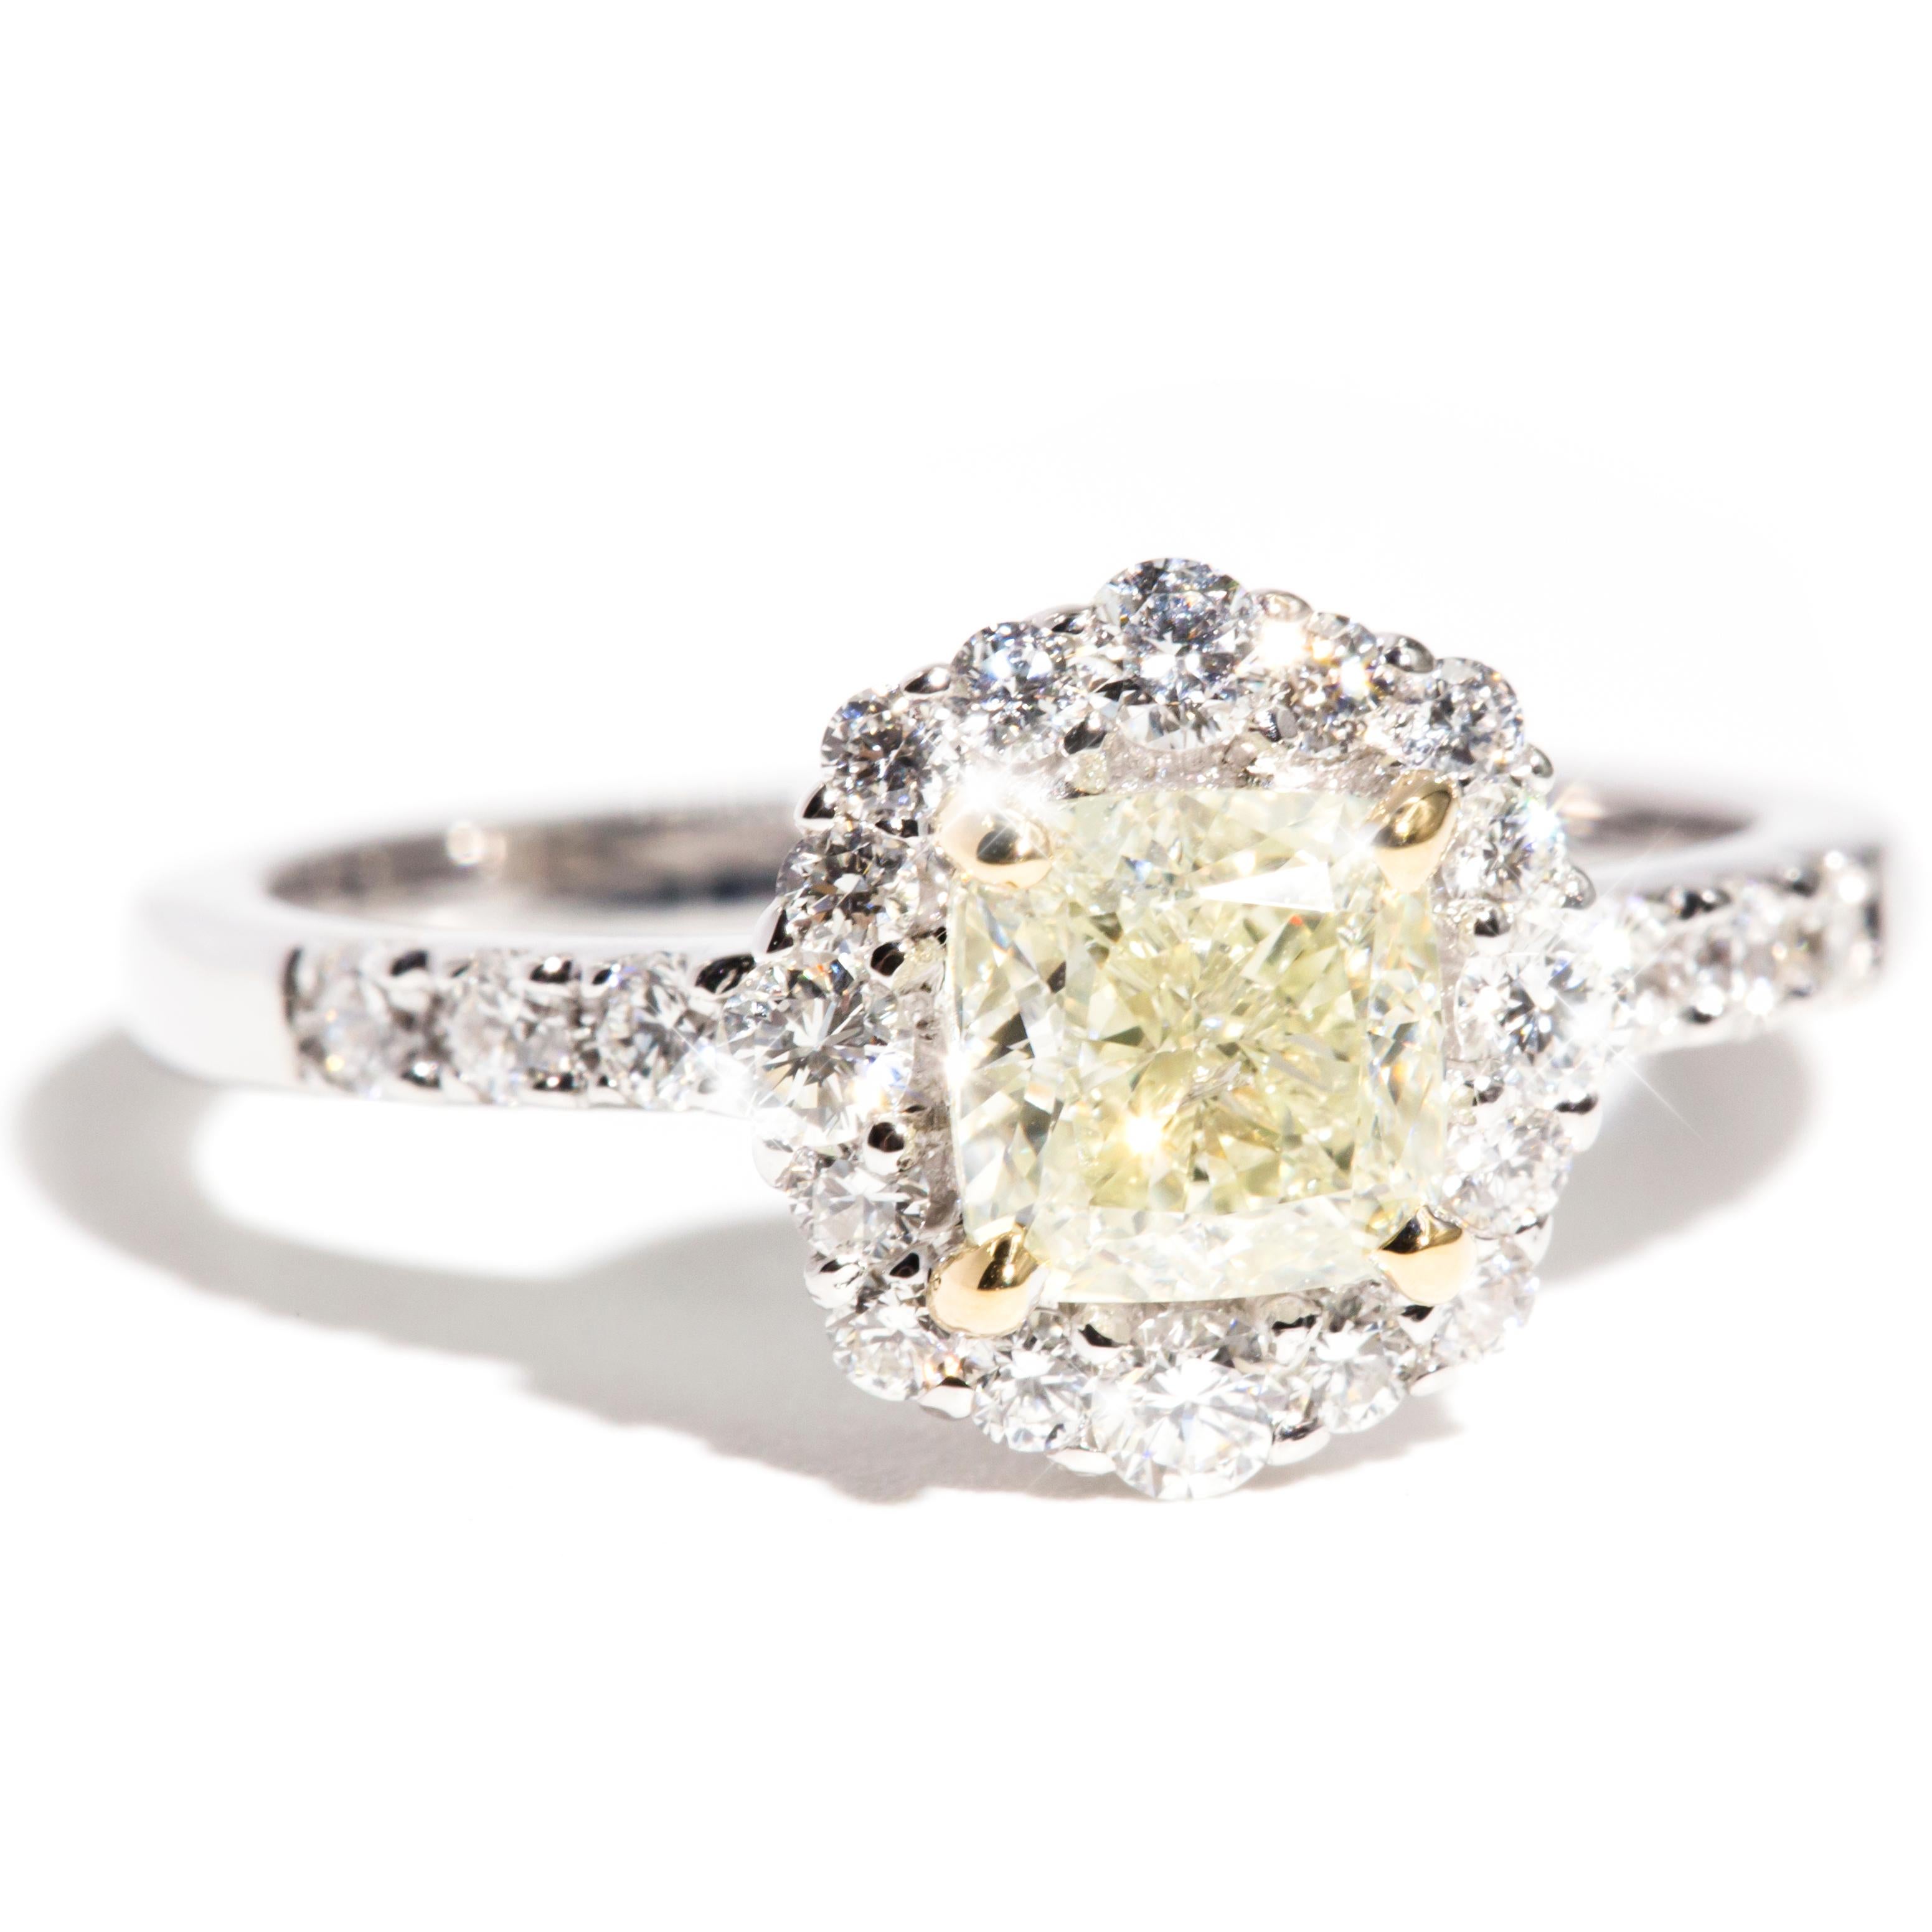 Forged in 18 carat gold is this uniquely designed contemporary engagement ring featuring an enchanting 1.01 carat certified fancy light yellow cushion cut diamond, embellished with over half a carat of glittering white round brilliant cut diamonds.